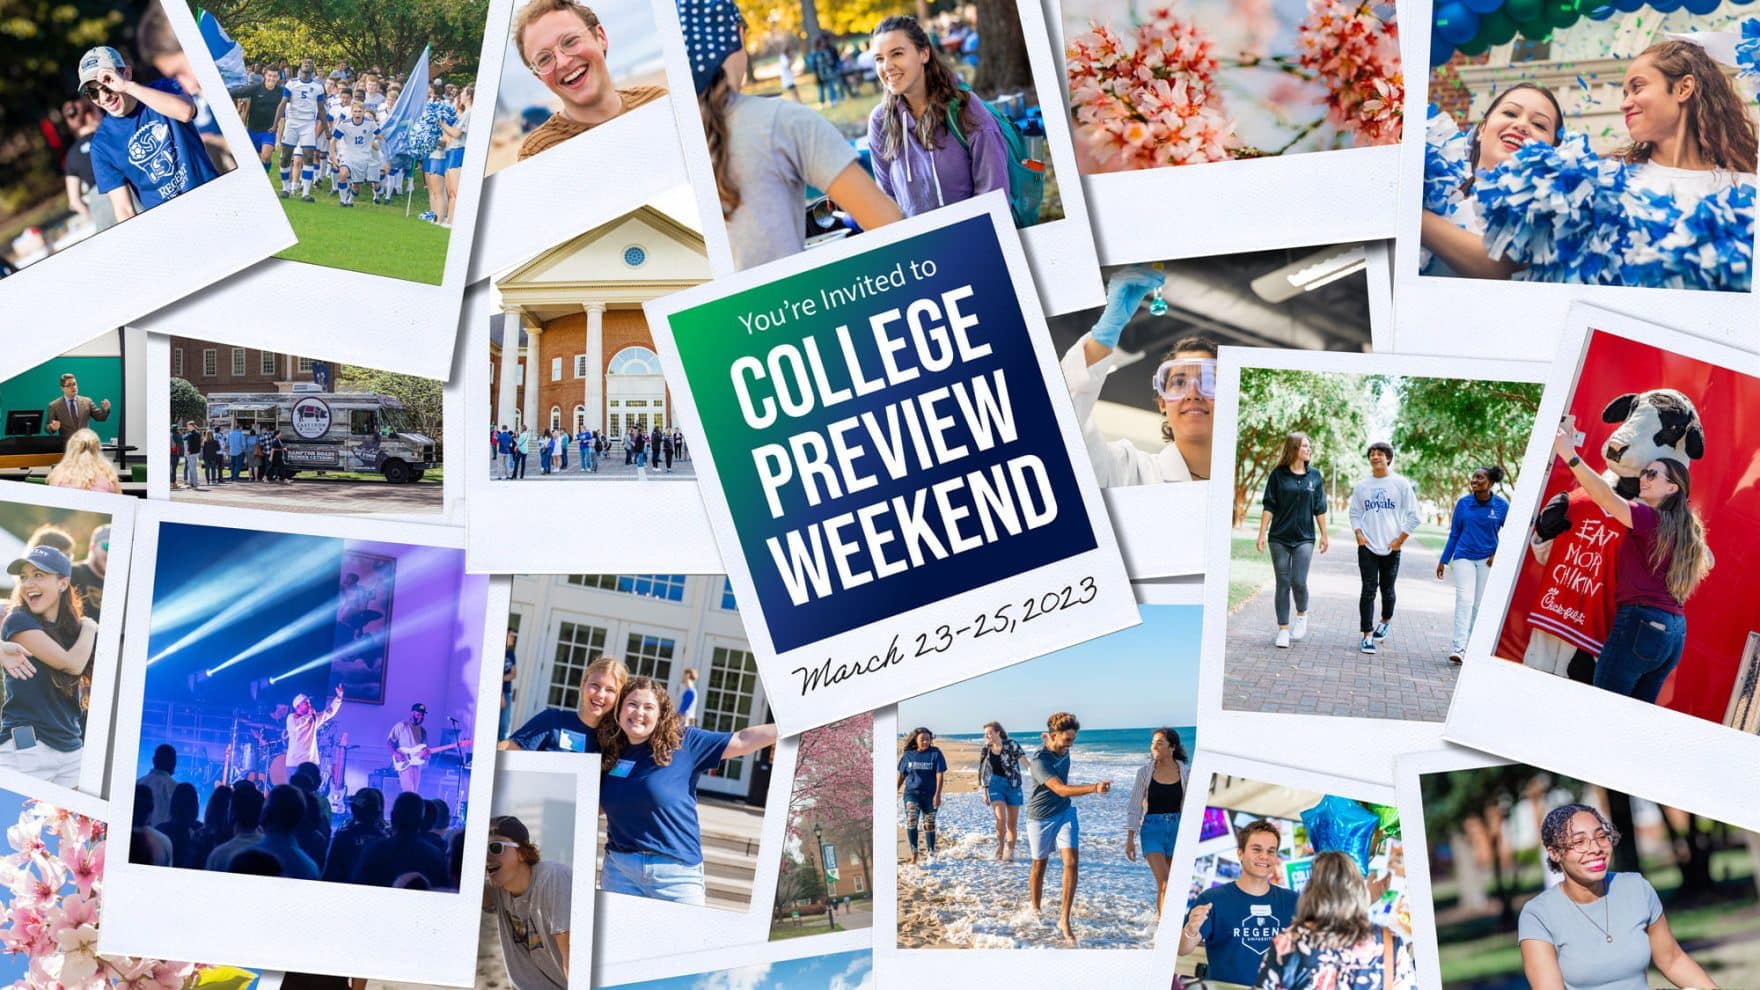 Come & See Your Bright Future at College Preview Weekend Event Registration: $50 Registration is temporarily unavailable due to a technical issue. We hope to have this issue resolved shortly. Thank you for your patience. College Preview Weekend March 23-25, 2023 | On Campus in Virginia Beach JOIN US FOR COLLEGE PREVIEW WEEKEND College Preview Weekend is an unforgettable three-day experience for you and your family. Discover Regent’s stunning 70-acre campus in Virginia Beach and see for yourself what life is like as a college student at Regent. During your visit, you’ll attend classes, meet faculty and staff, tour campus, learn about admissions and scholarships, explore our coastal region, and stay on campus in Regent’s award-winning college dorms if you choose. Register for College Preview Weekend and come see for yourself why Regent is America’s premier Christian university. Regent University College Preview Weekend Café Moka. WHO SHOULD ATTEND? All Junior & Senior Highschool Students Transfer Students (Generous transfer policy—up to 90 credit hours!) Students’ Parents & Guardians are welcome to join us WHILE YOU ARE HERE, YOU WILL: Attend Classes, Meet Professors & Make Connections Experience Student-led UnChapel Customize Your Friday Journey: Admissions, Tours, Financial Aid, Honors & More Dine at The Ordinary & Refuel at the Student Center’s Cafe Moka Plus, Enjoy a Local Excursion or Campus Activity! SCHEDULE MEALS & DINING ACCOMMODATIONS FOR FAMILIES DIRECTIONS & CAMPUS FAQS CONTACT US 1000 Regent University Drive, Virginia Beach, VA 23464 800.373.5504757.352.4127 EQUAL OPPORTUNITY POLICY FOR STUDENTS Regent University does not discriminate on the basis of race, color, sex, national or ethnic origin, disability, age or veteran status in admissions, treatment or access to its programs and activities, or in the administration of educational policies, scholarships, loan programs, athletics or other University programs. In addition, Regent does not discriminate based on religion, except as necessary to comply with Regent’s Standard of Personal Conduct and Statement of Christian Community and Mission. ©2023 Legal Notice Privacy Policy Non Discrimination Policy ABA-Required Disclosures Drug & Alcohol Abuse Prevention Program Student Appeals and Grievances Skip to toolbar About WordPress Regent University Customize 33 updates available 00 Comments in moderation New Edit Page SEOOK Imagify WP Rocket Duplicate Post Forms Edit Forms Search Howdy, Endia Young Log Out